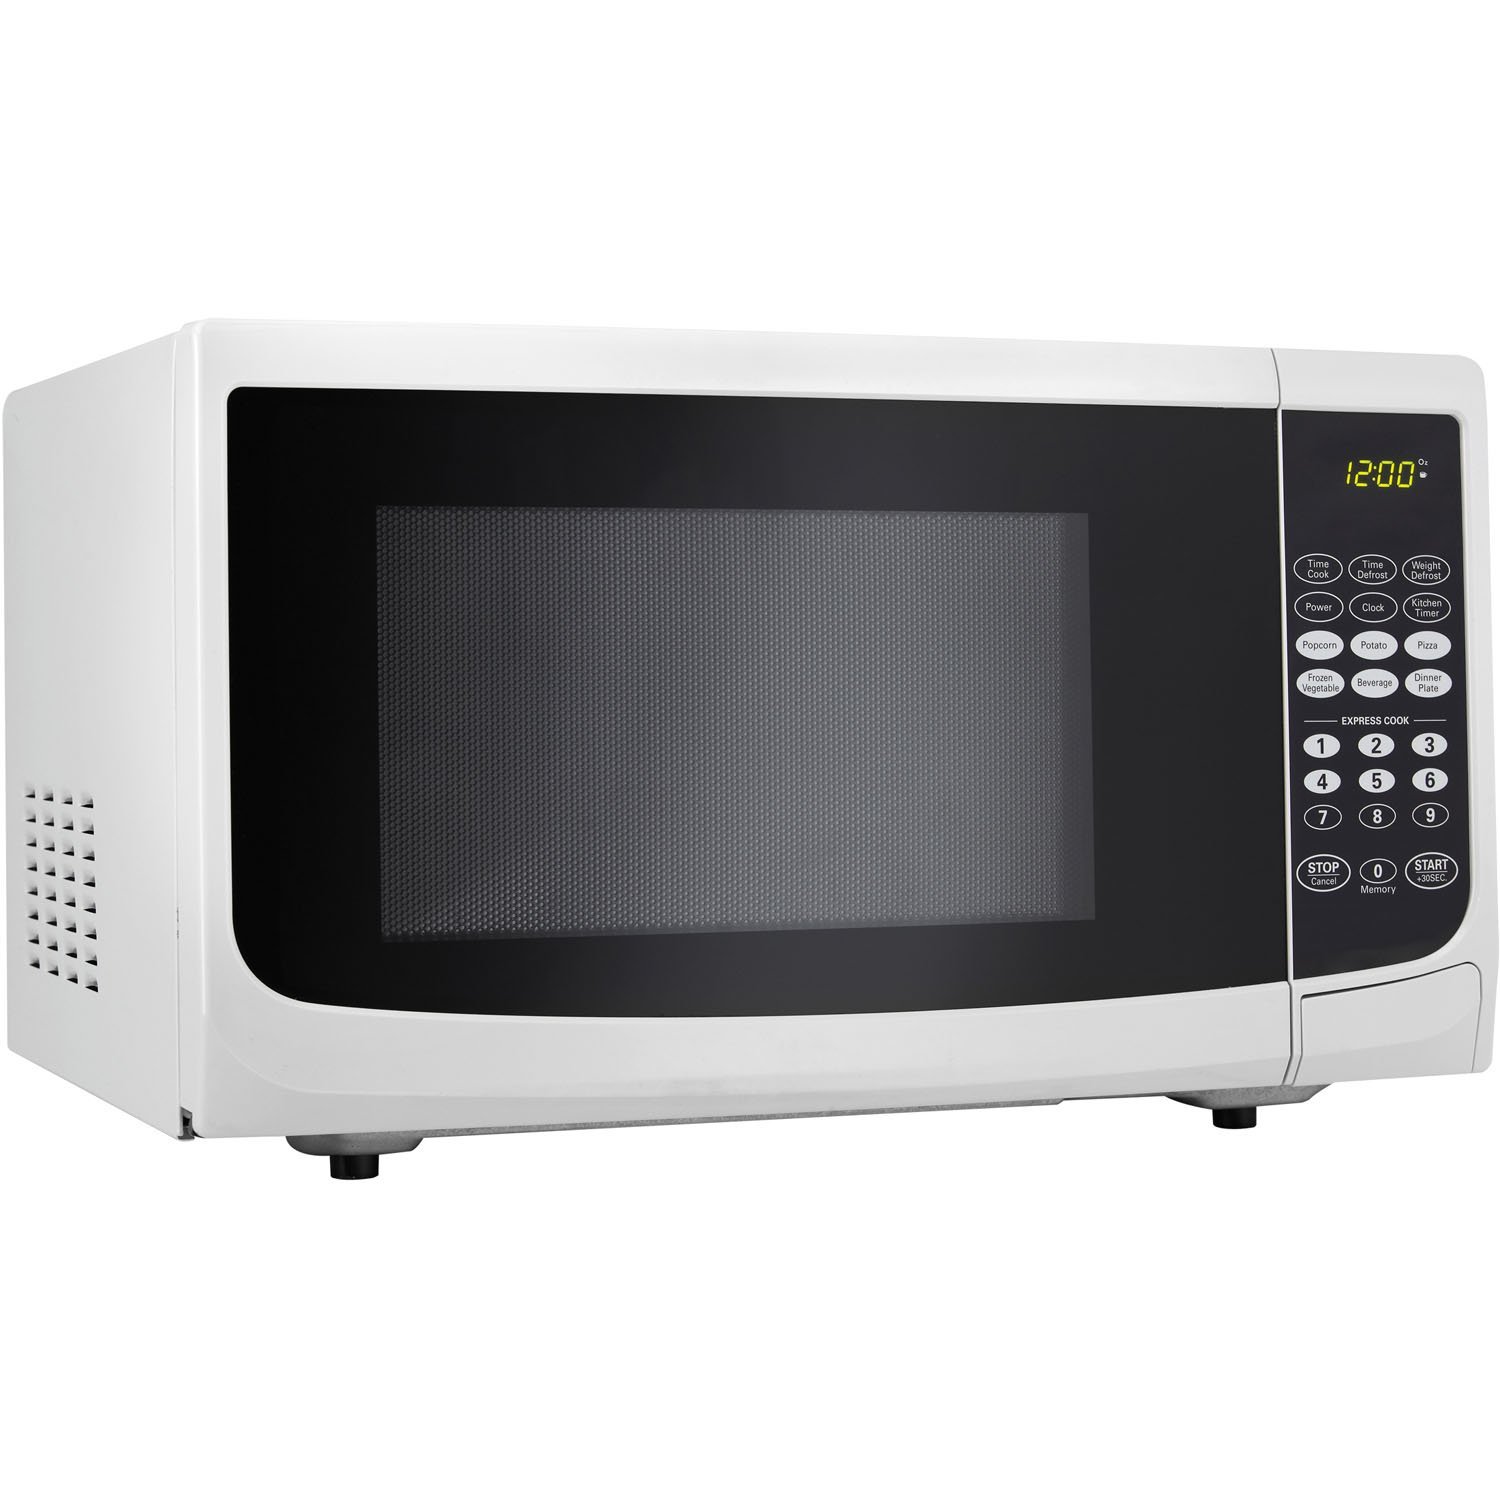 Top 10 best Microwave Ovens in 2016 Reviews